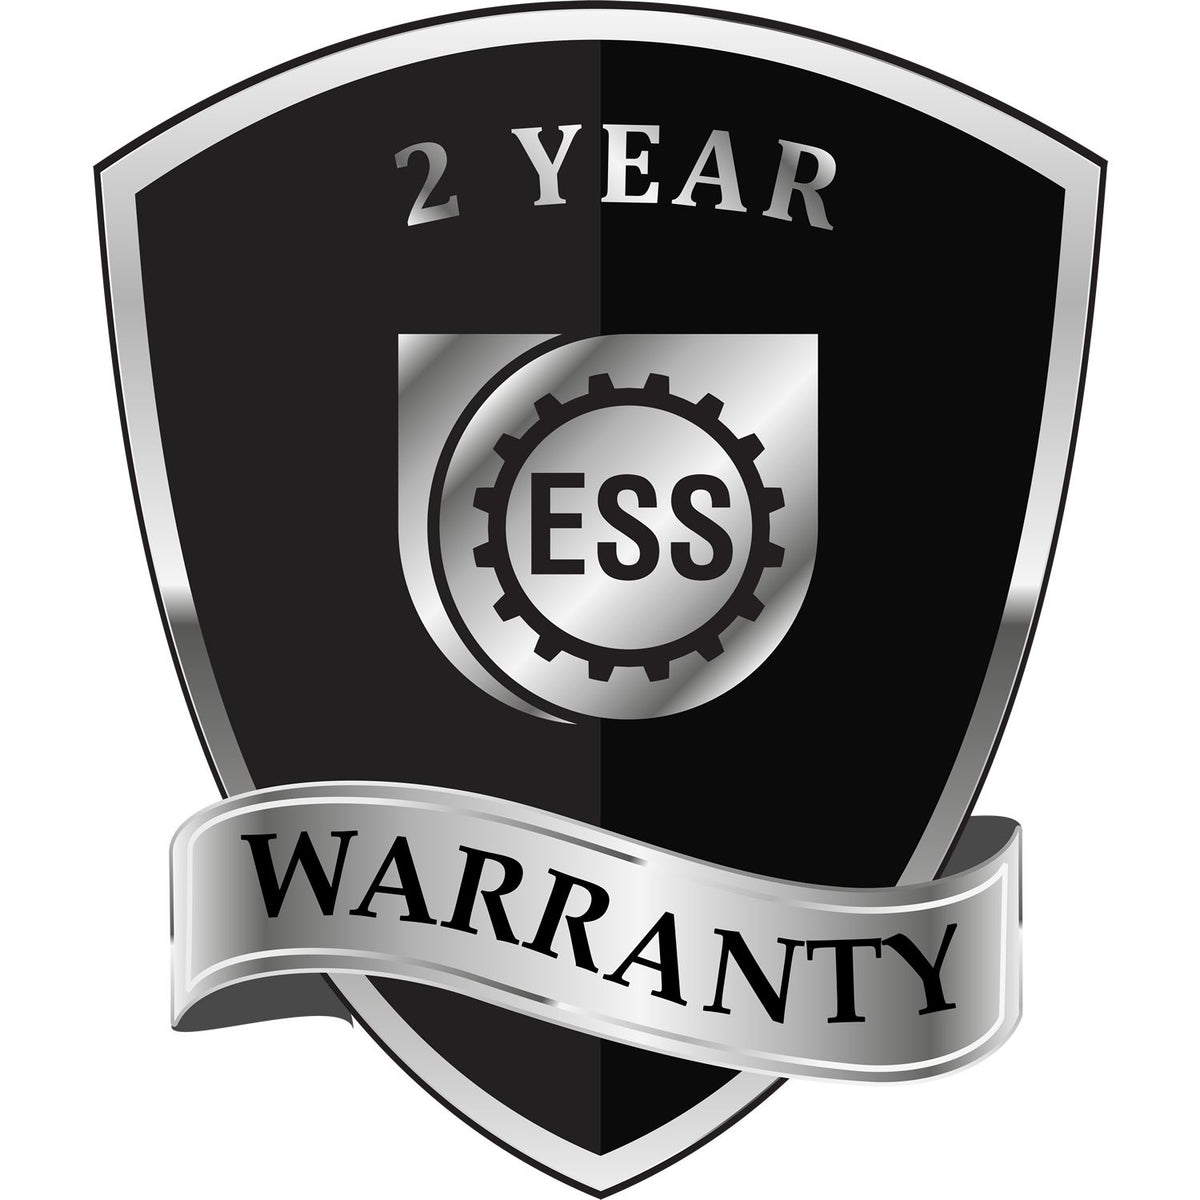 A badge or emblem showing a warranty icon for the Heavy Duty Cast Iron Louisiana Land Surveyor Seal Embosser